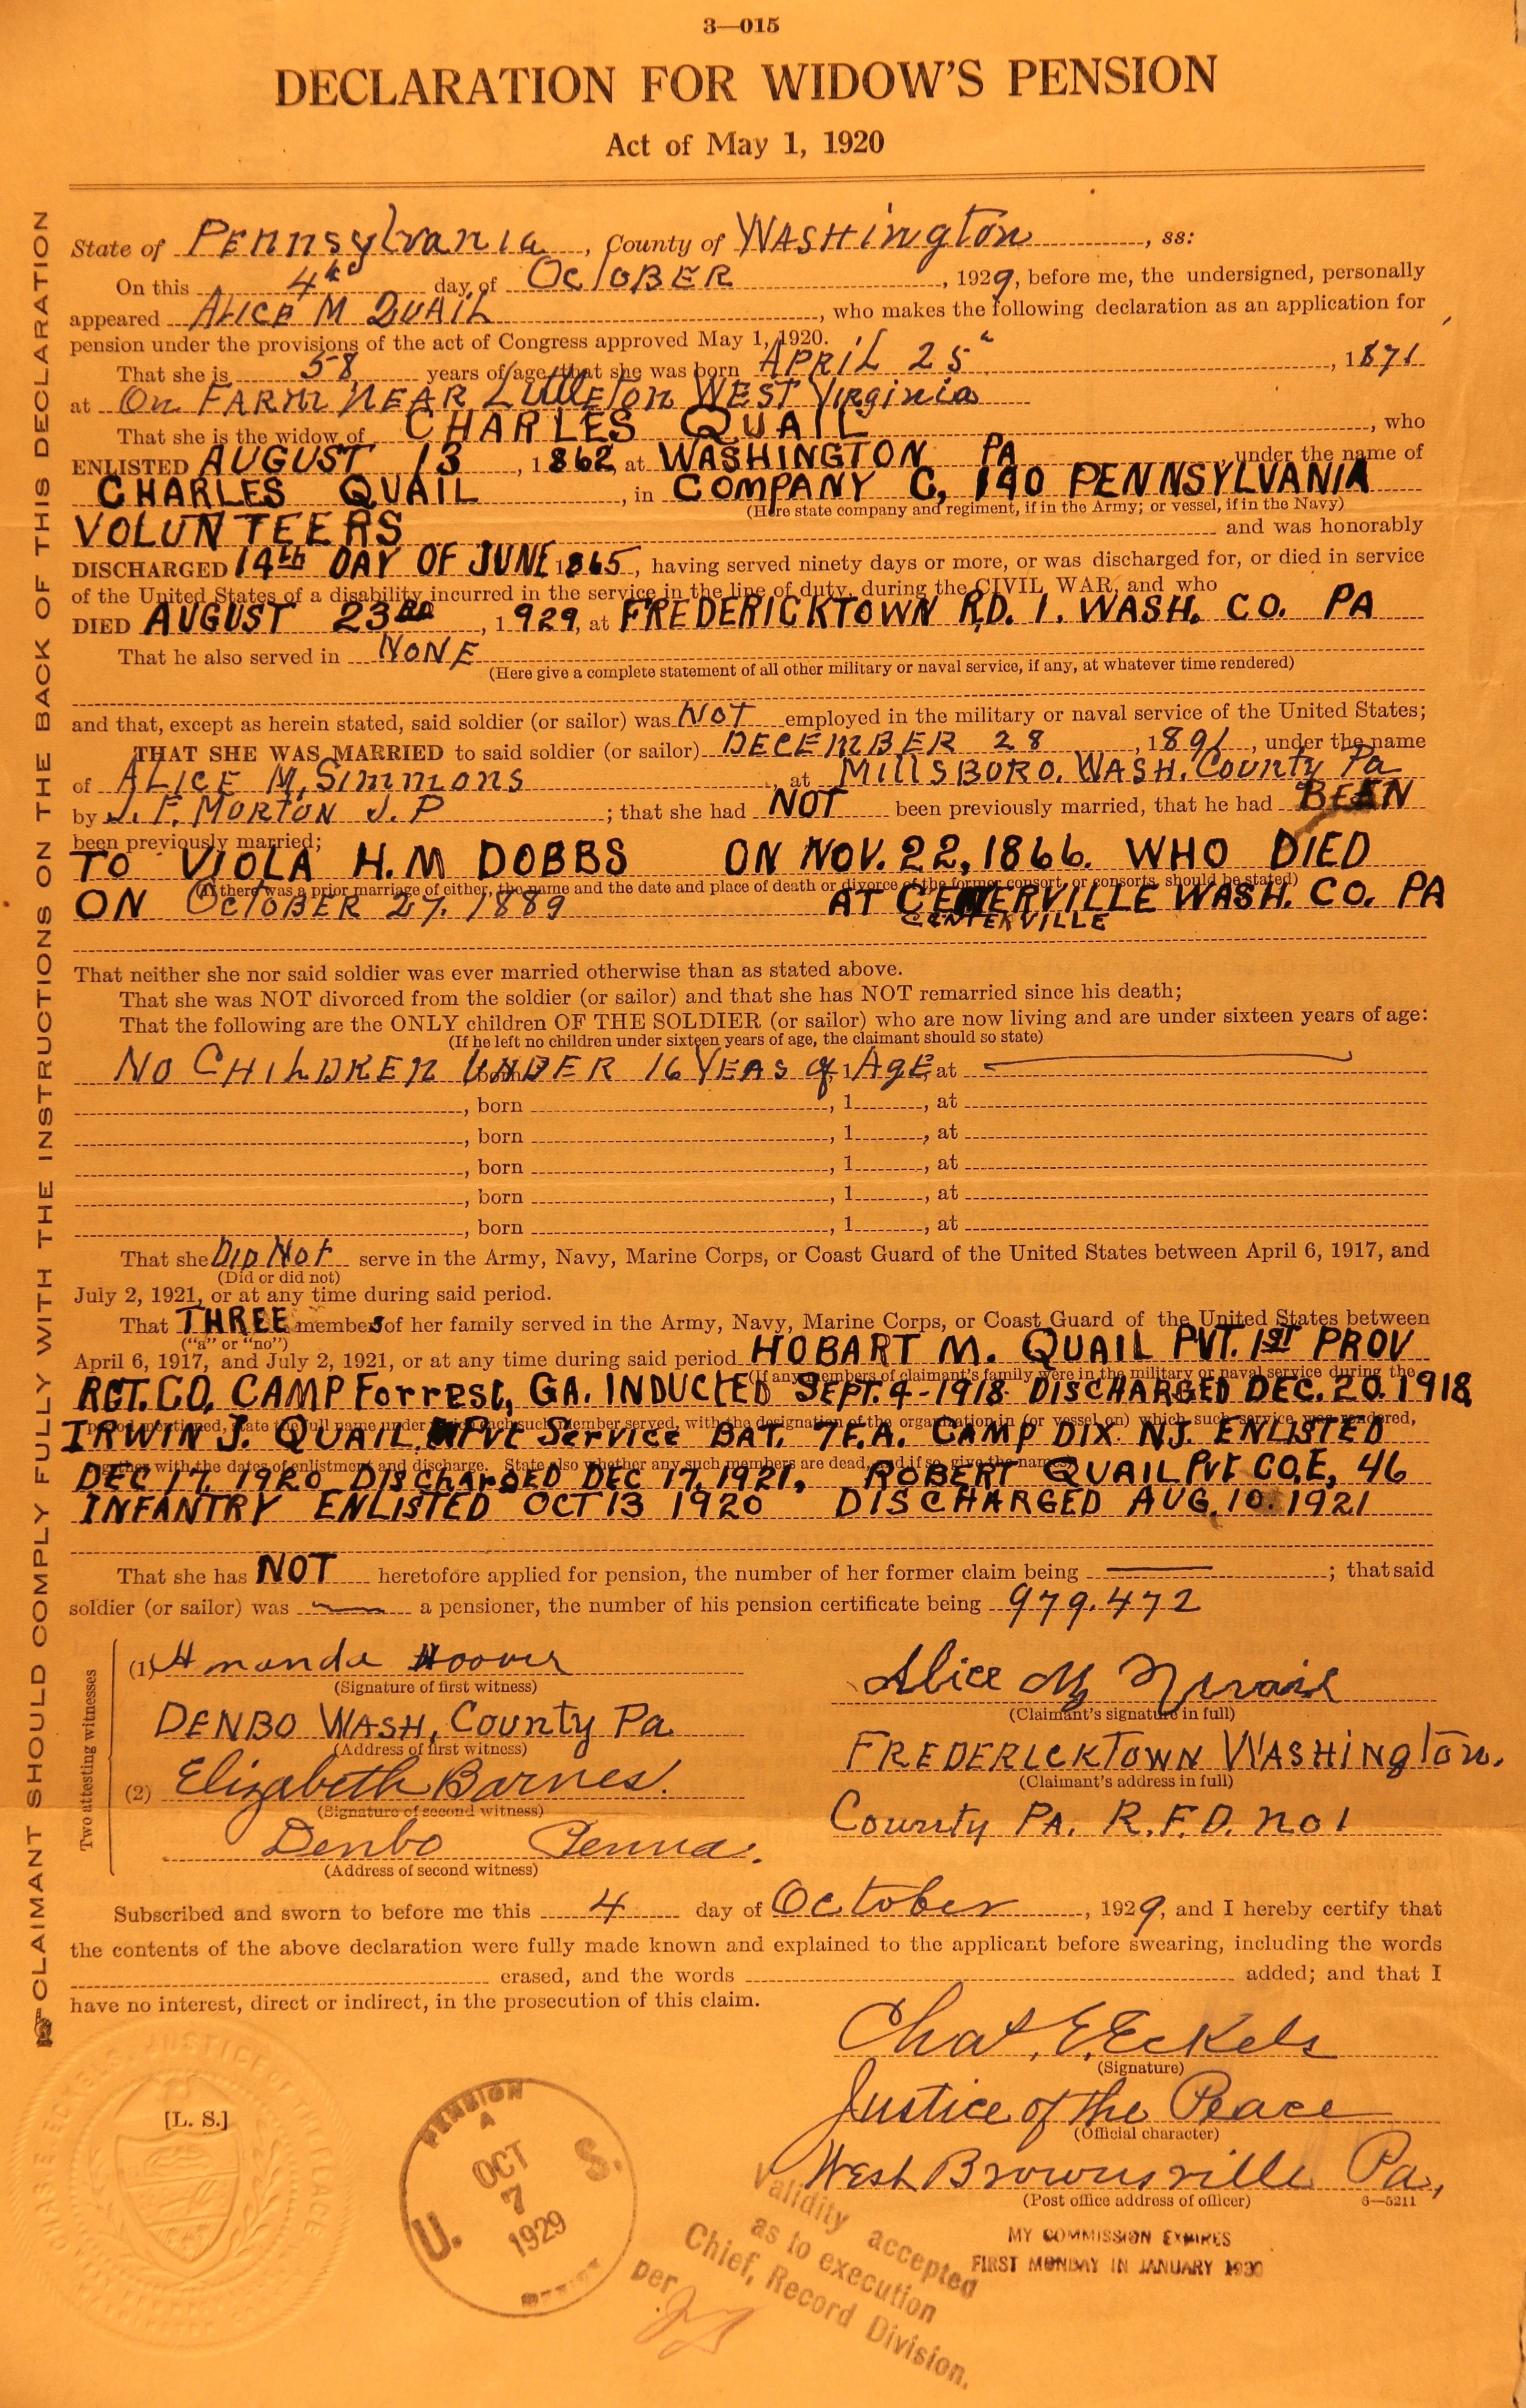 An application for a widow's pension under the act of May 1, 1920